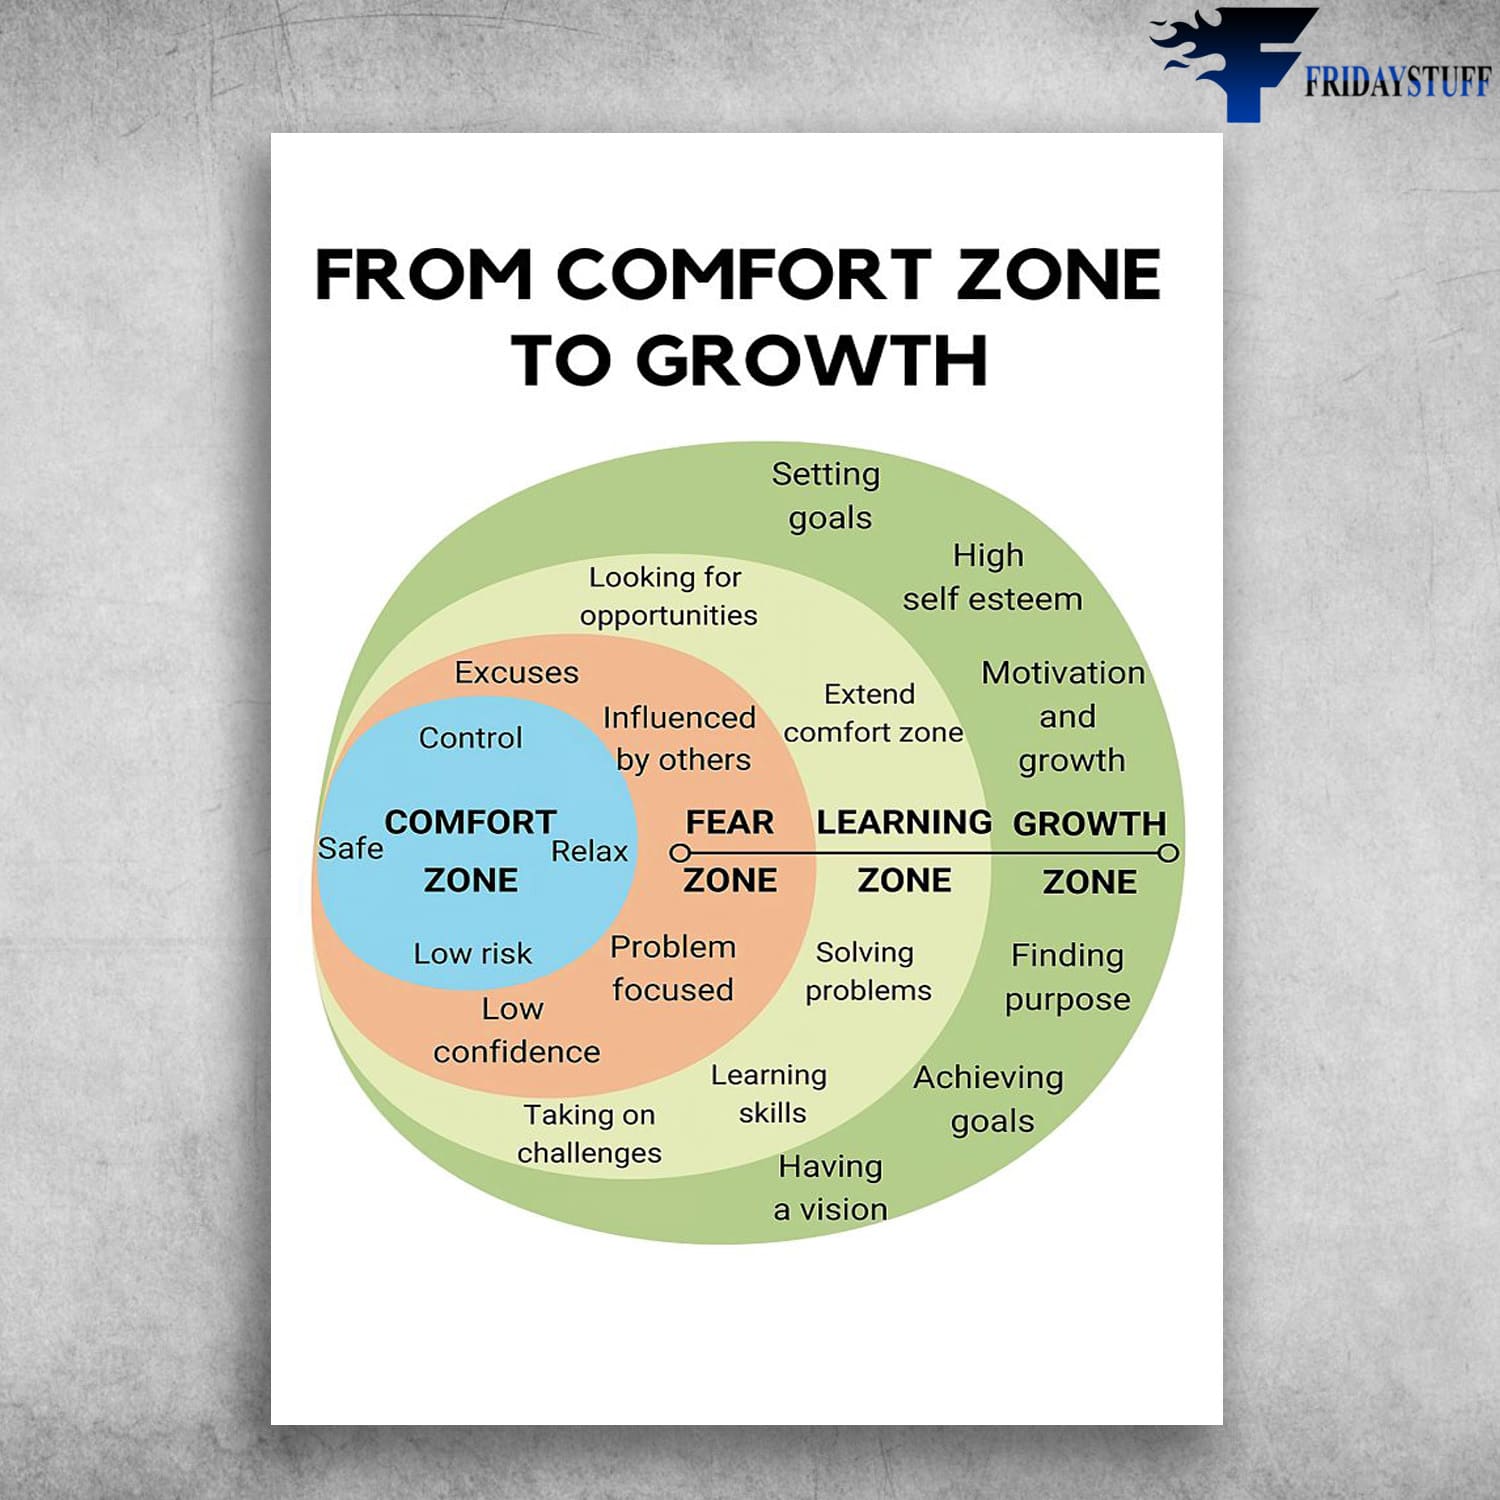 https://fridaystuff.com/wp-content/uploads/2021/12/Self-Growth-From-Comfort-Zone-To-Growth-Confort-Zone-Fear-Zone-Learning-Zone-Growth-Zone.jpg